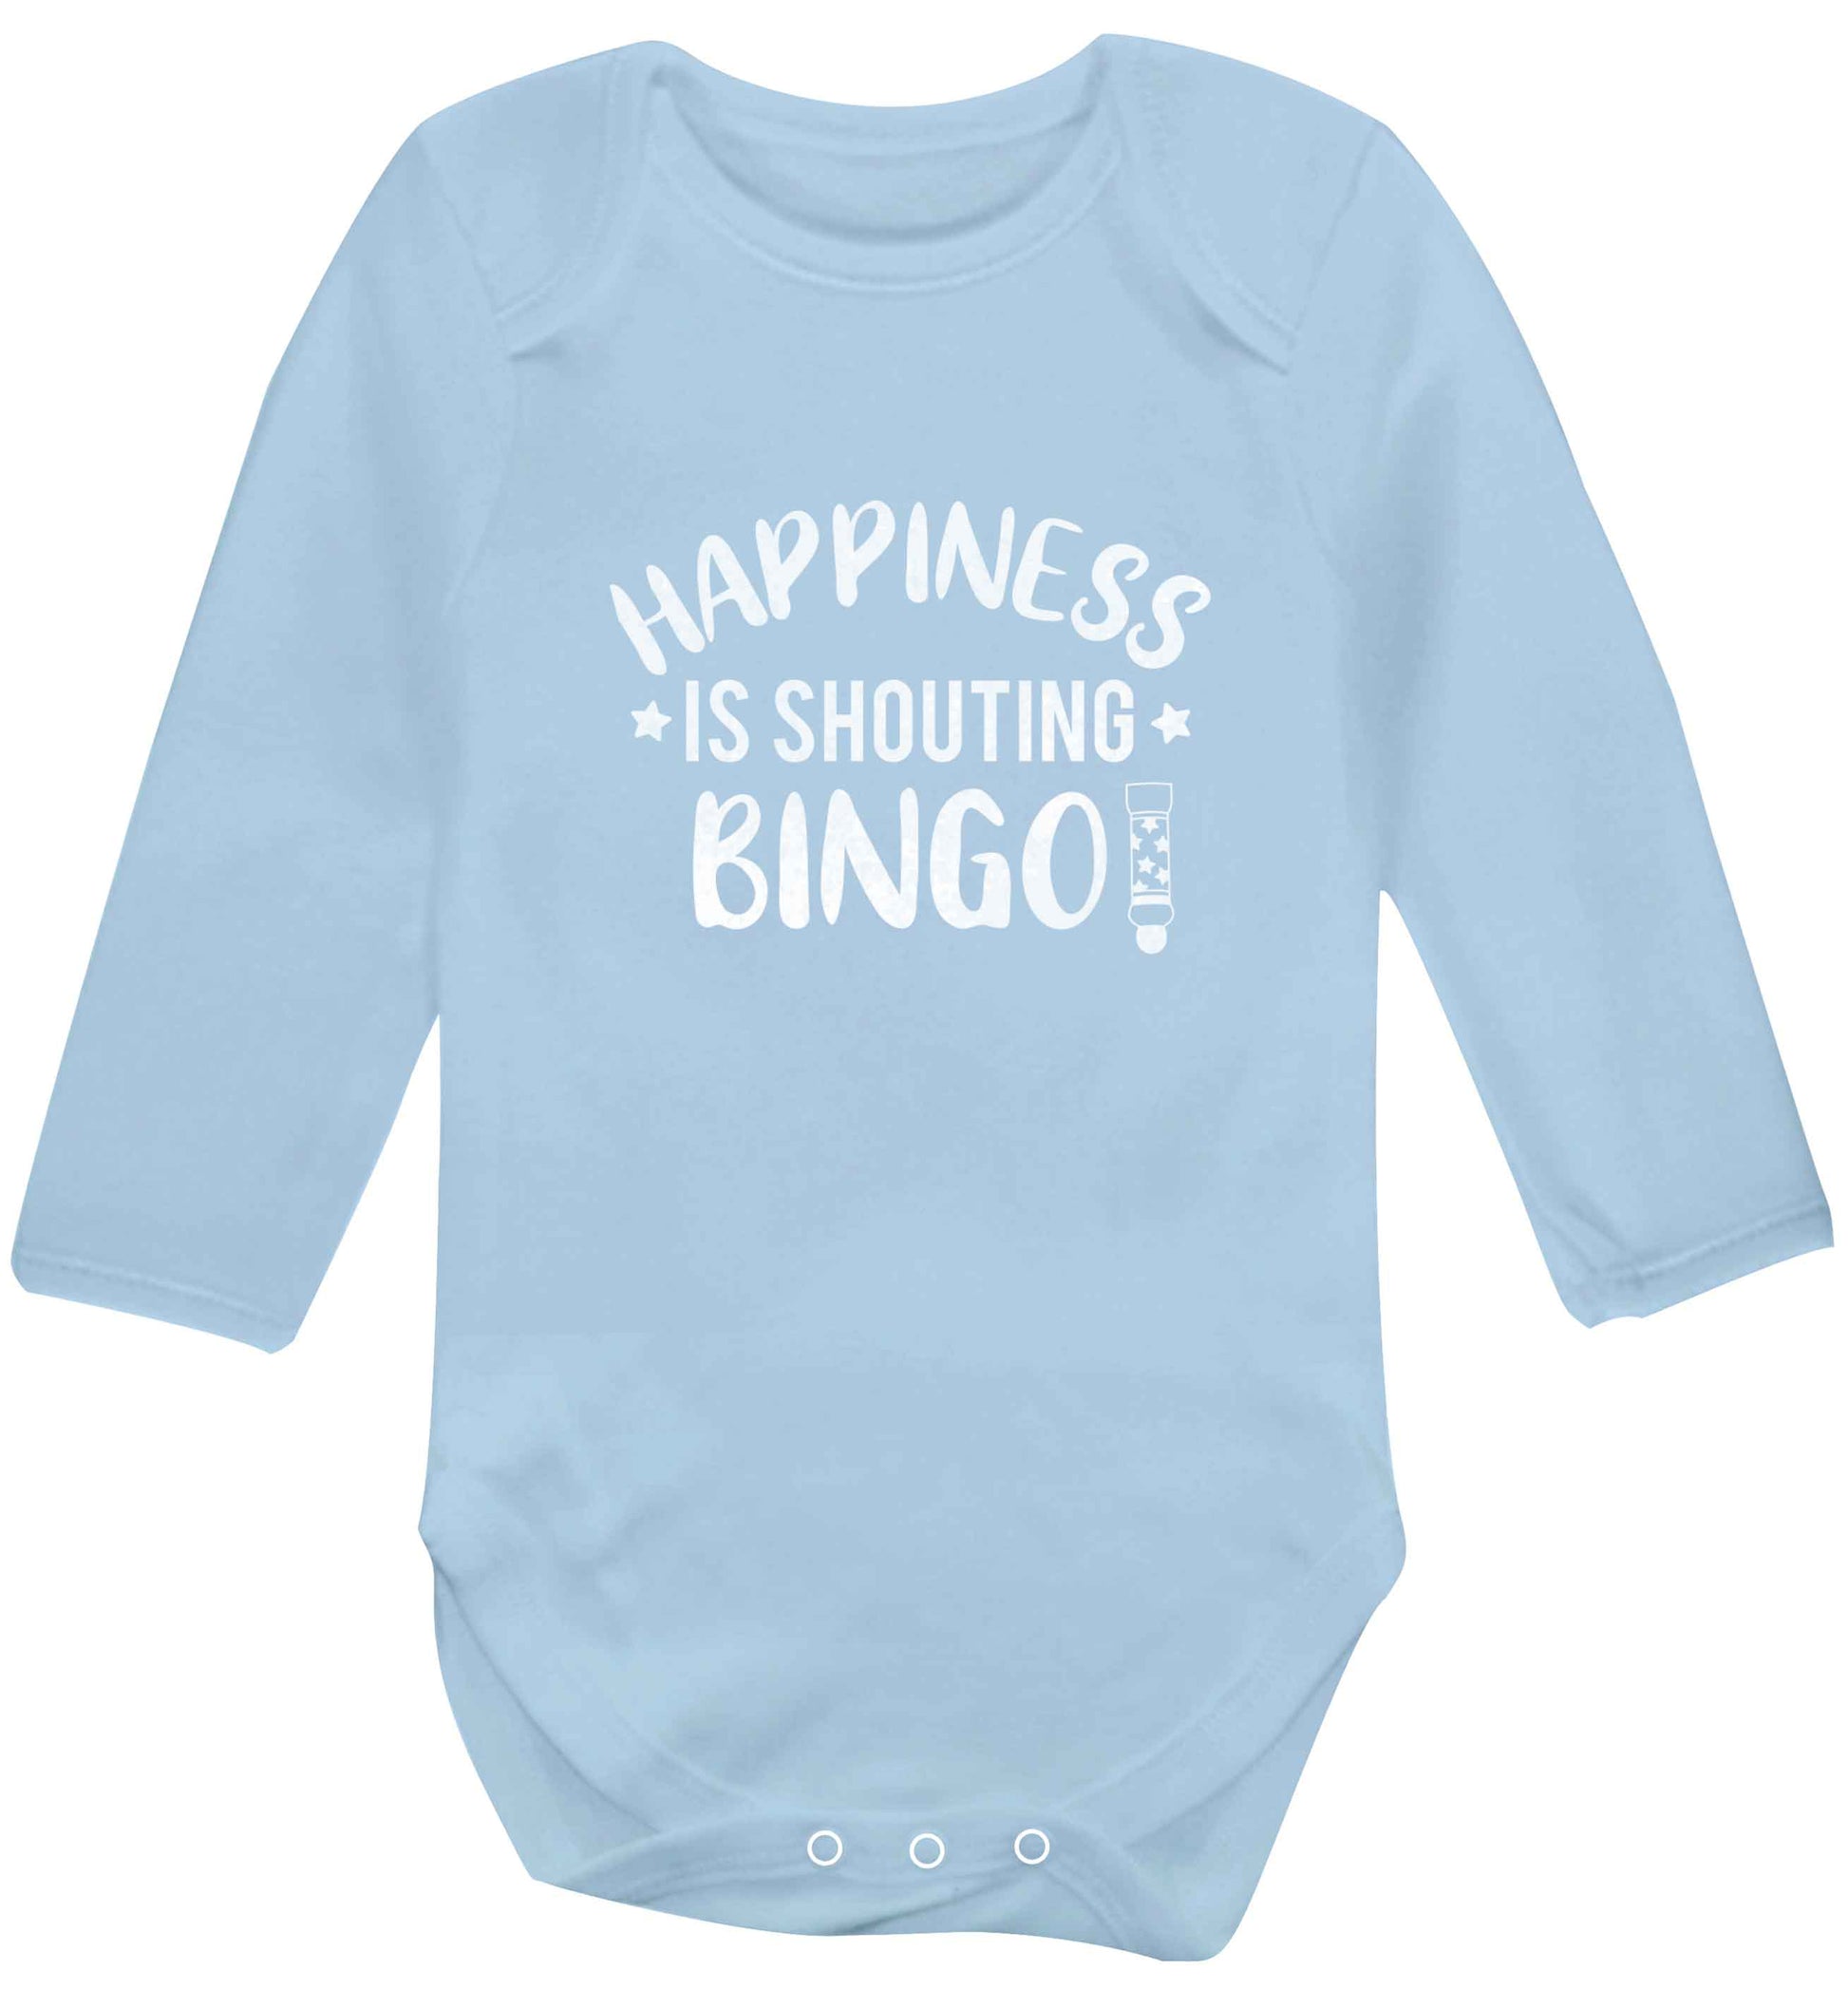 Happiness is shouting bingo! baby vest long sleeved pale blue 6-12 months